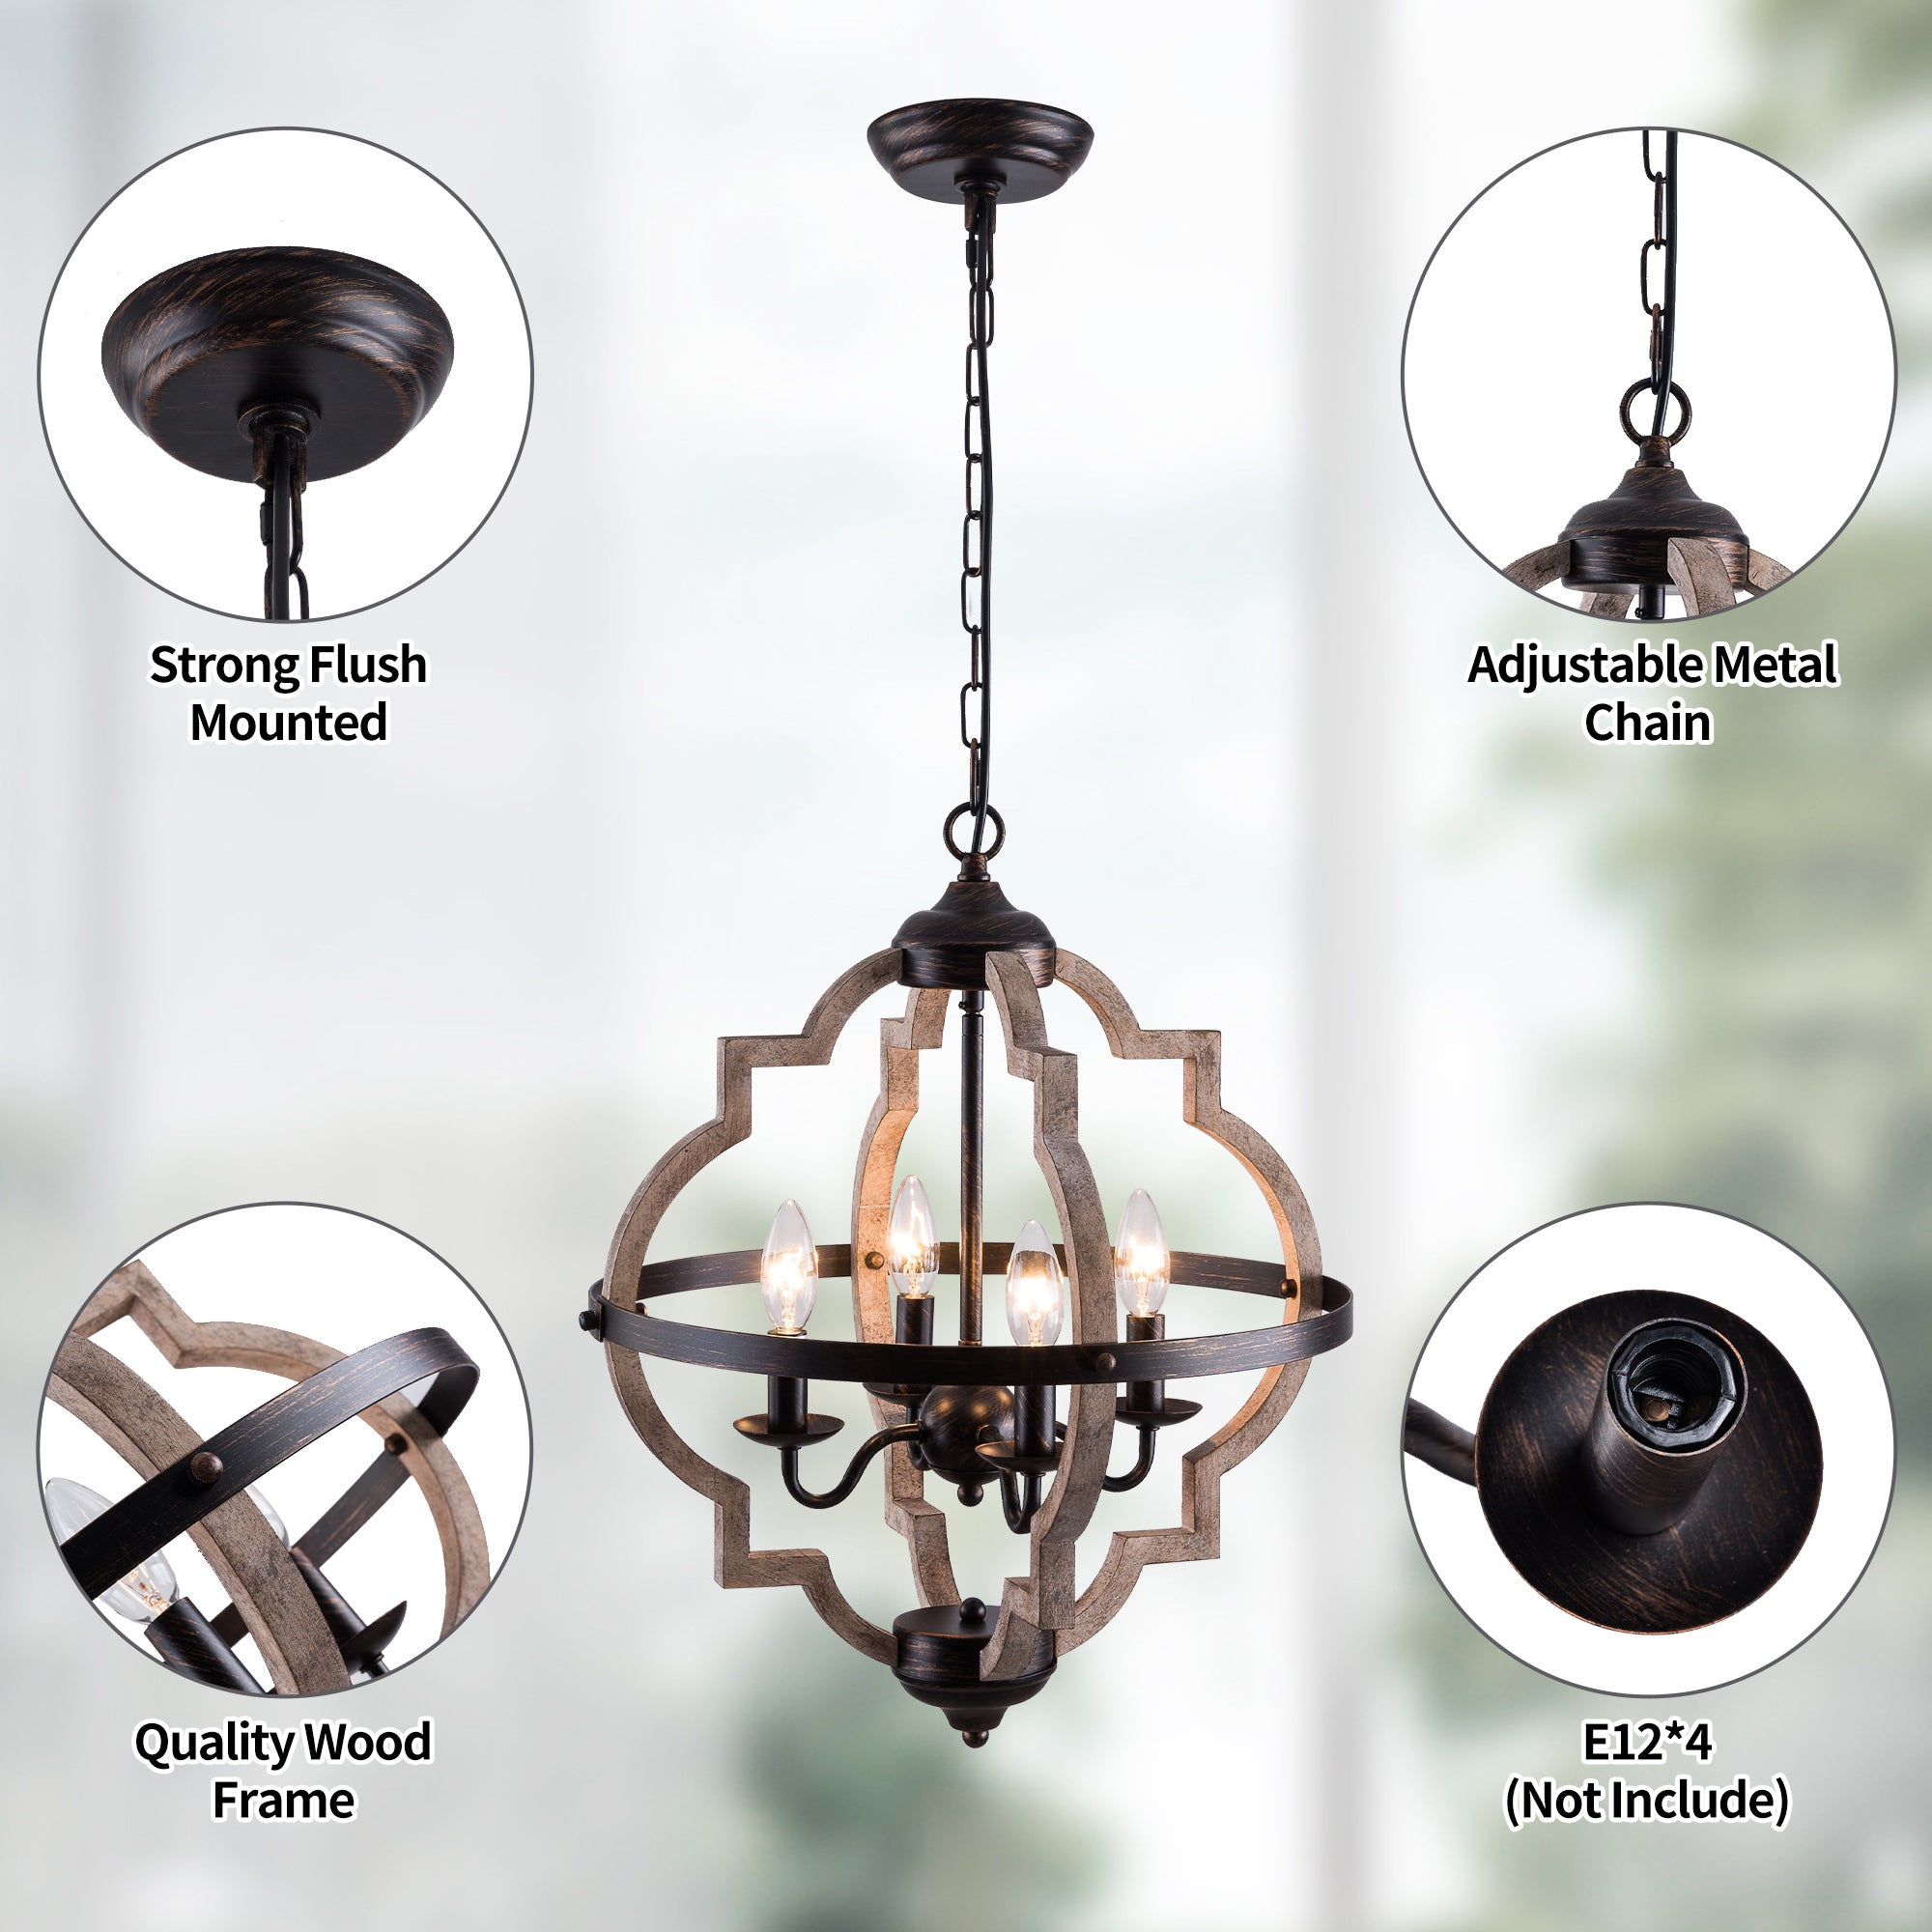 SIMPOL HOME Orb Candle 4-Light Chandelier in Wood Color Painted Finish, Rustic Farmhouse Flush Mount Ceiling Light Fixture, Height Adjustable Metal Pendant Lighting for Dining&Living Room Bedroom Hallway Kitchen Island Foyer Entryway